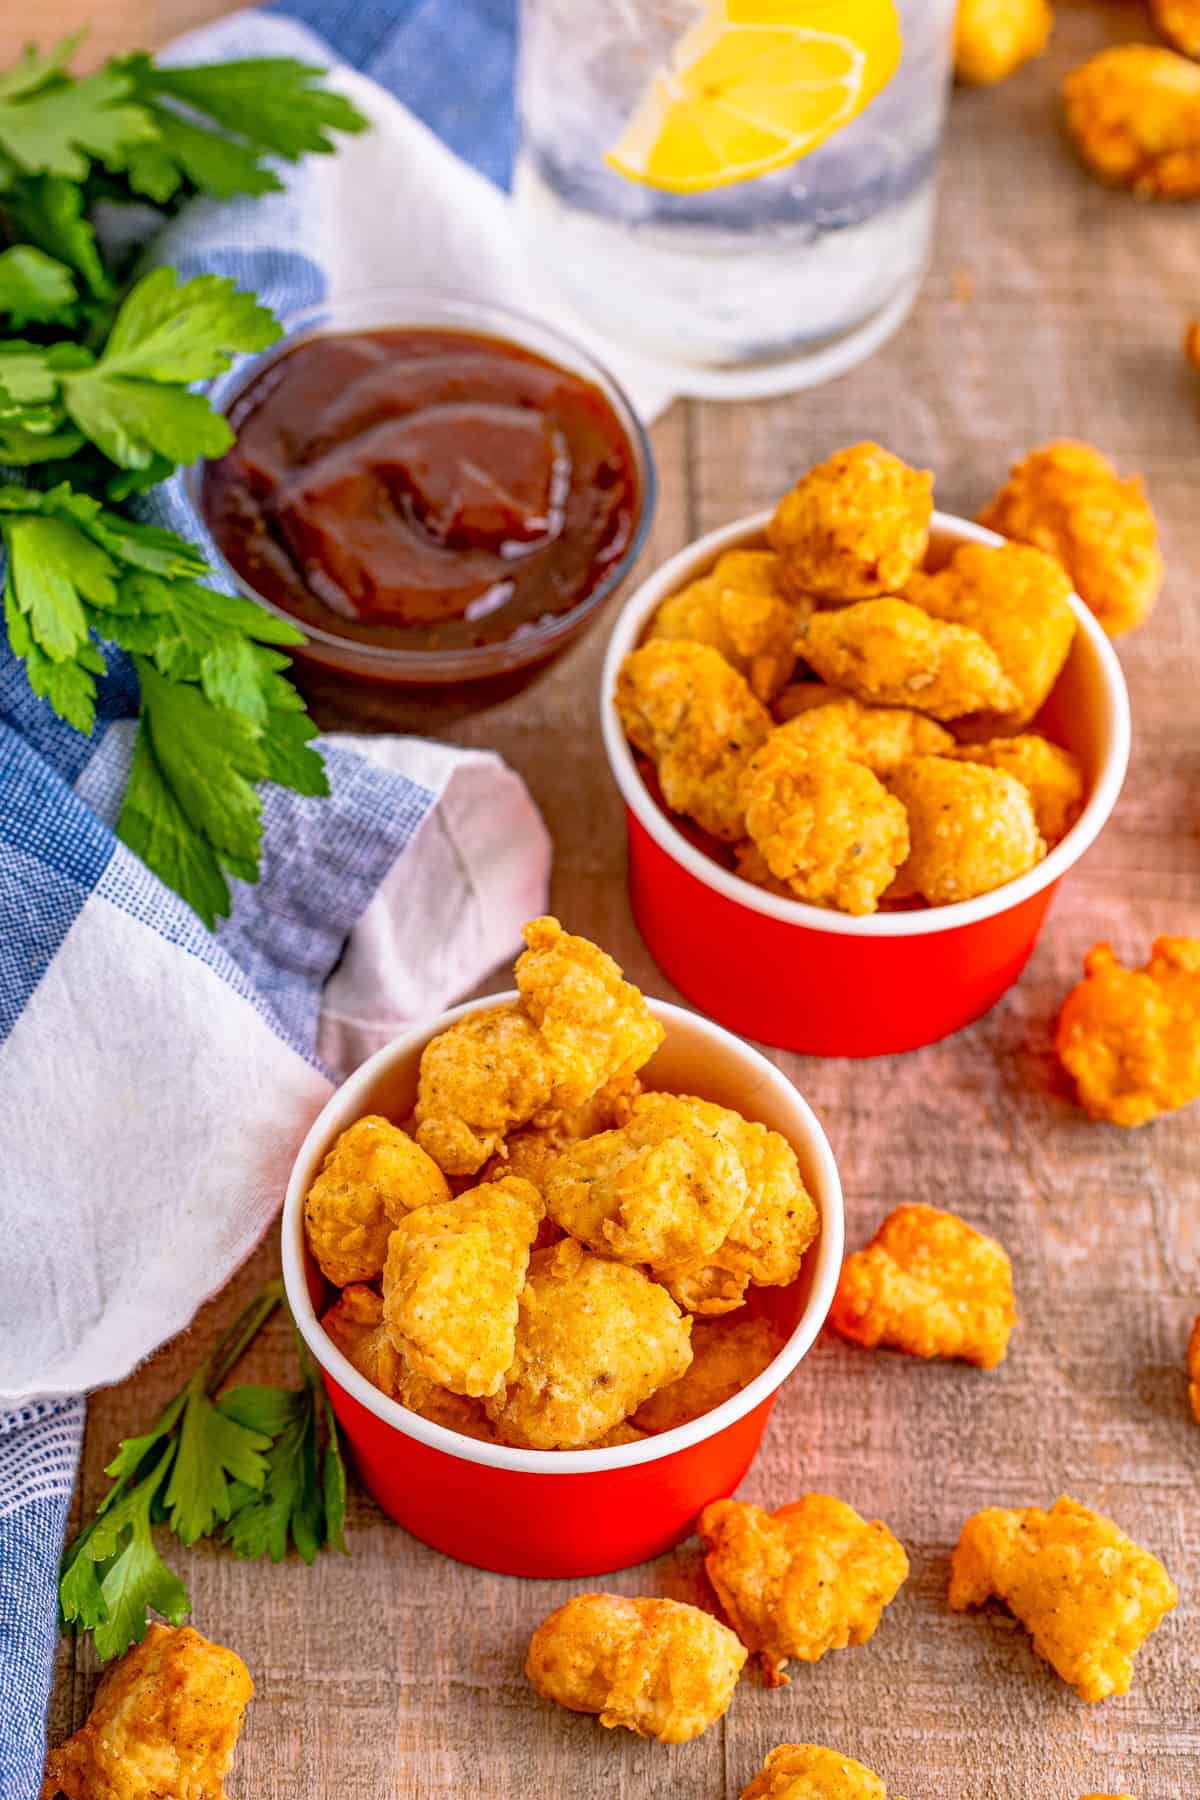 Slightly overhead of finished Popcorn Chicken in two red containers with BBQ sauce in background.